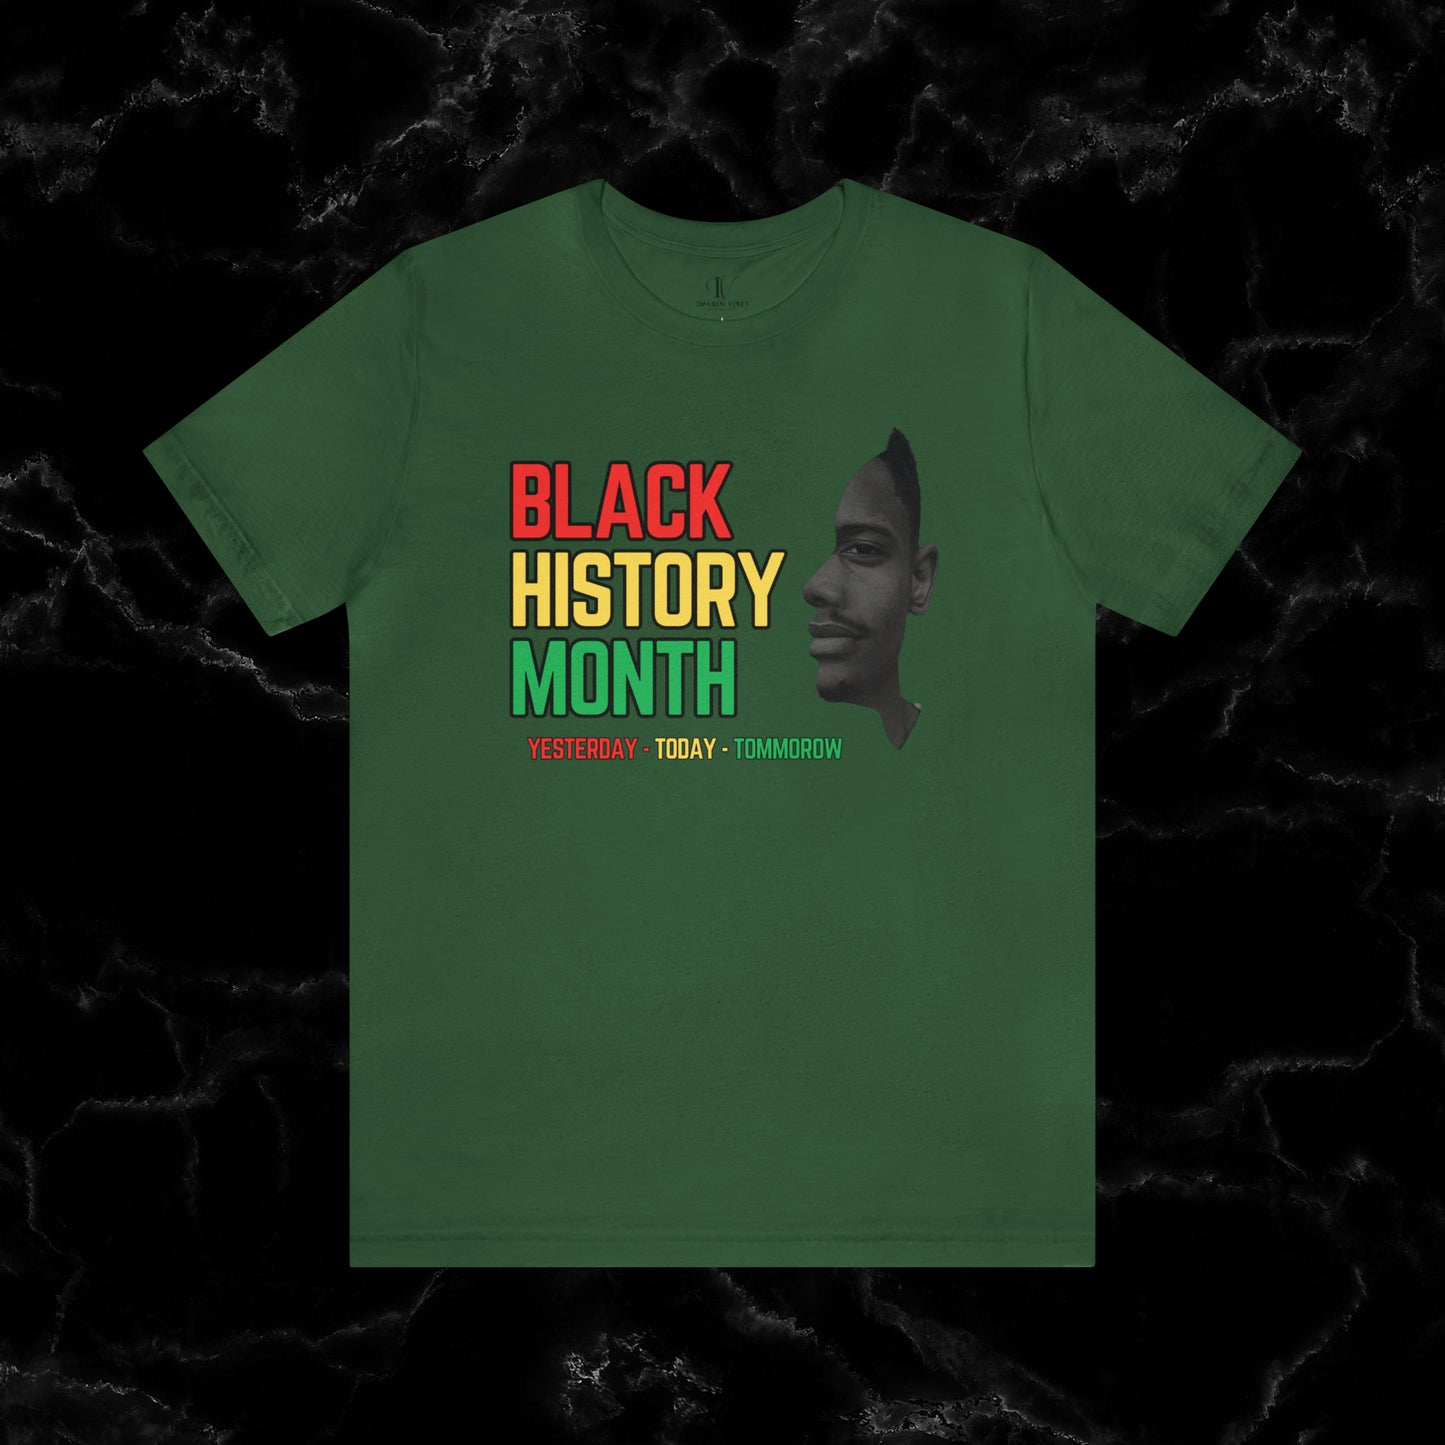 Empowering Black History Month Shirt - Yesterday, Today, Tomorrow - African American Pride T-Shirt Evergreen XS 